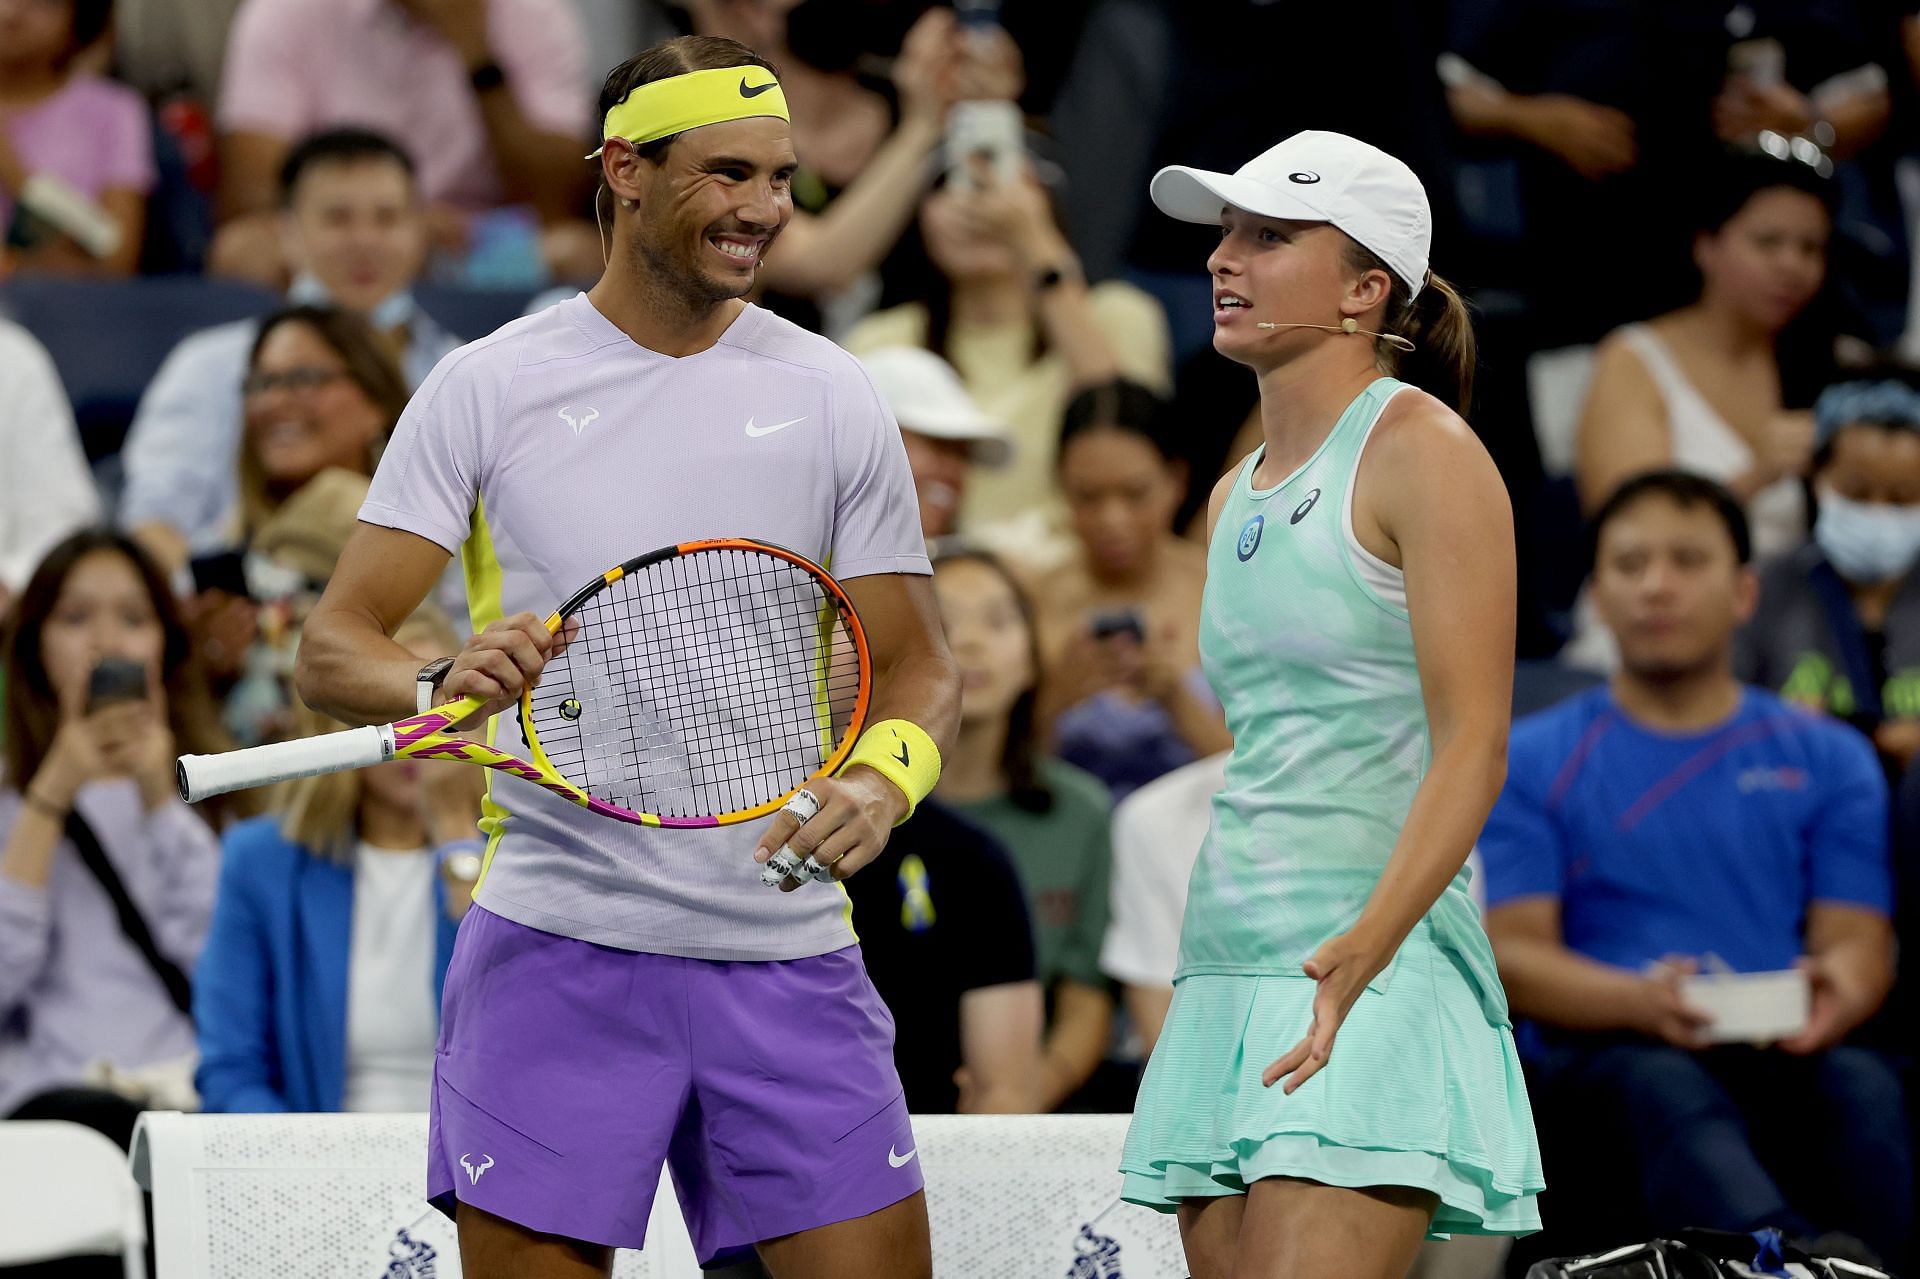 Rafael Nadal and Iga Swiatek pictured at the 2022 US Open.